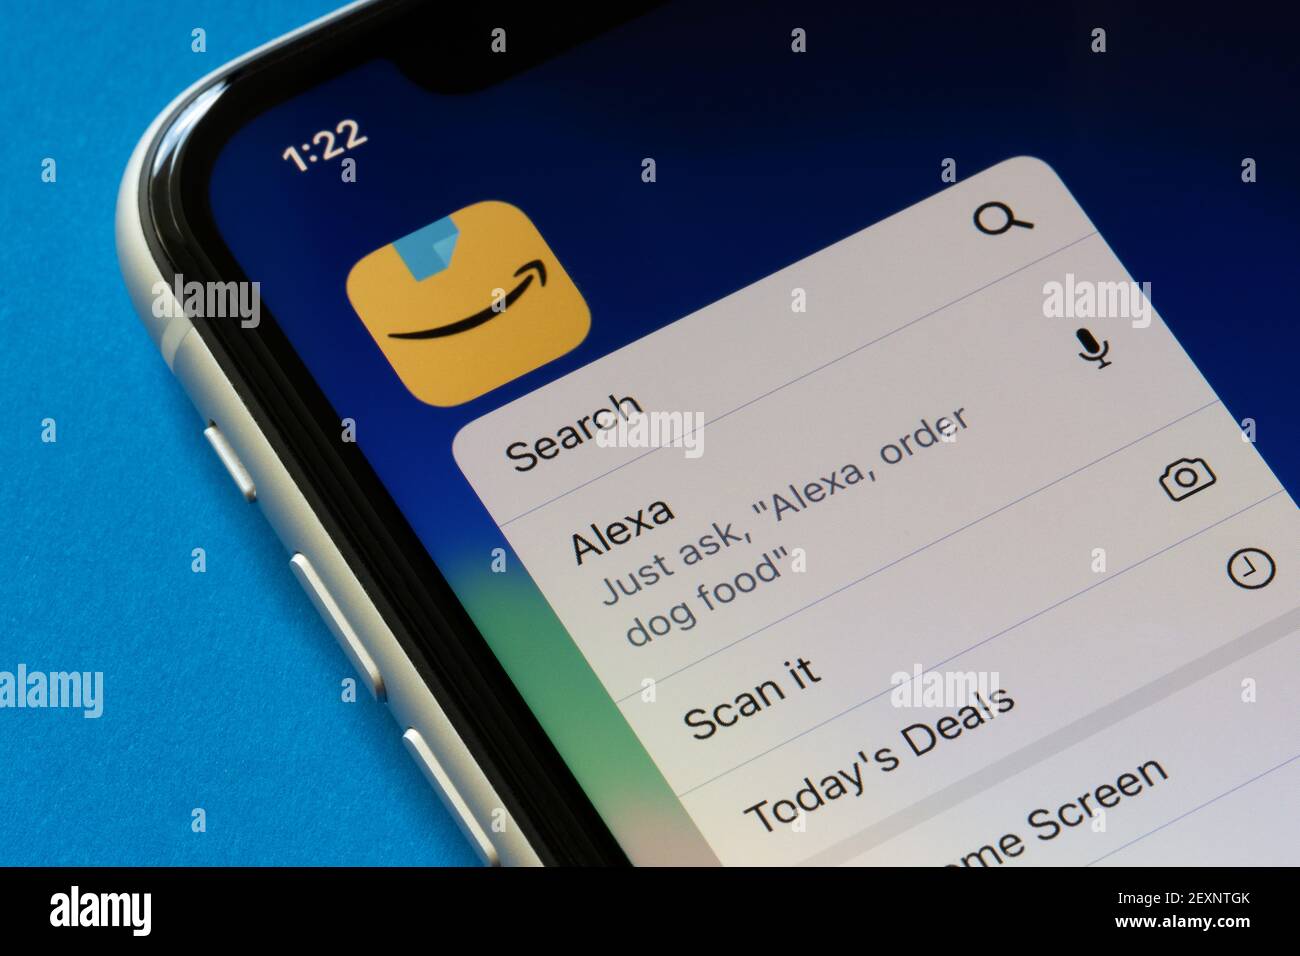 The Amazon app icon and its quick actions menu are seen on an iPhone, with  functions including Alexa voice control service, on March 4, 2021 Stock  Photo - Alamy